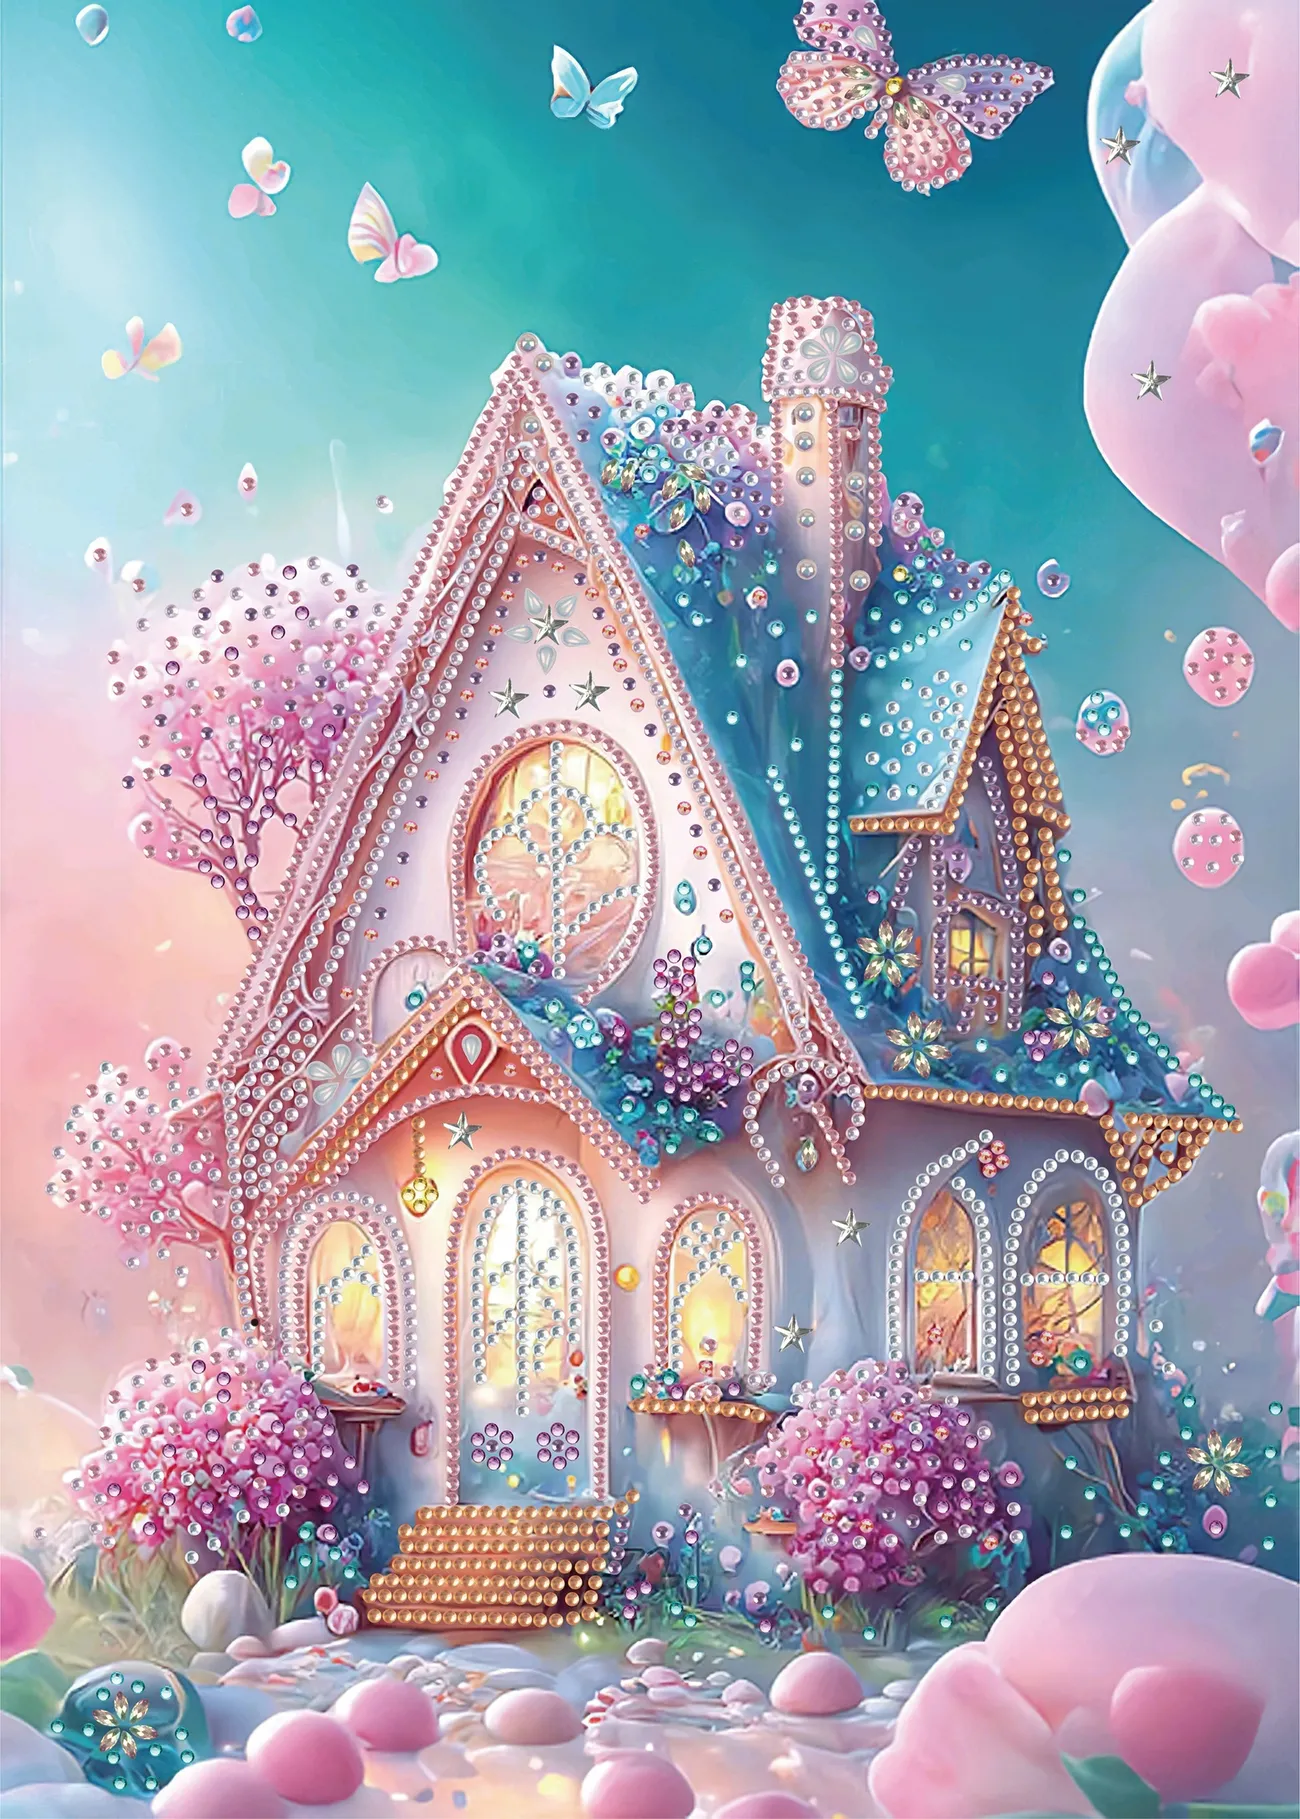 11.81inch*15.75inch DIY Diamond Painting Room Decoration Hanging Painting  Ornament Handmade Exquisite Bright Diamond And Big Diamond Pink Castle